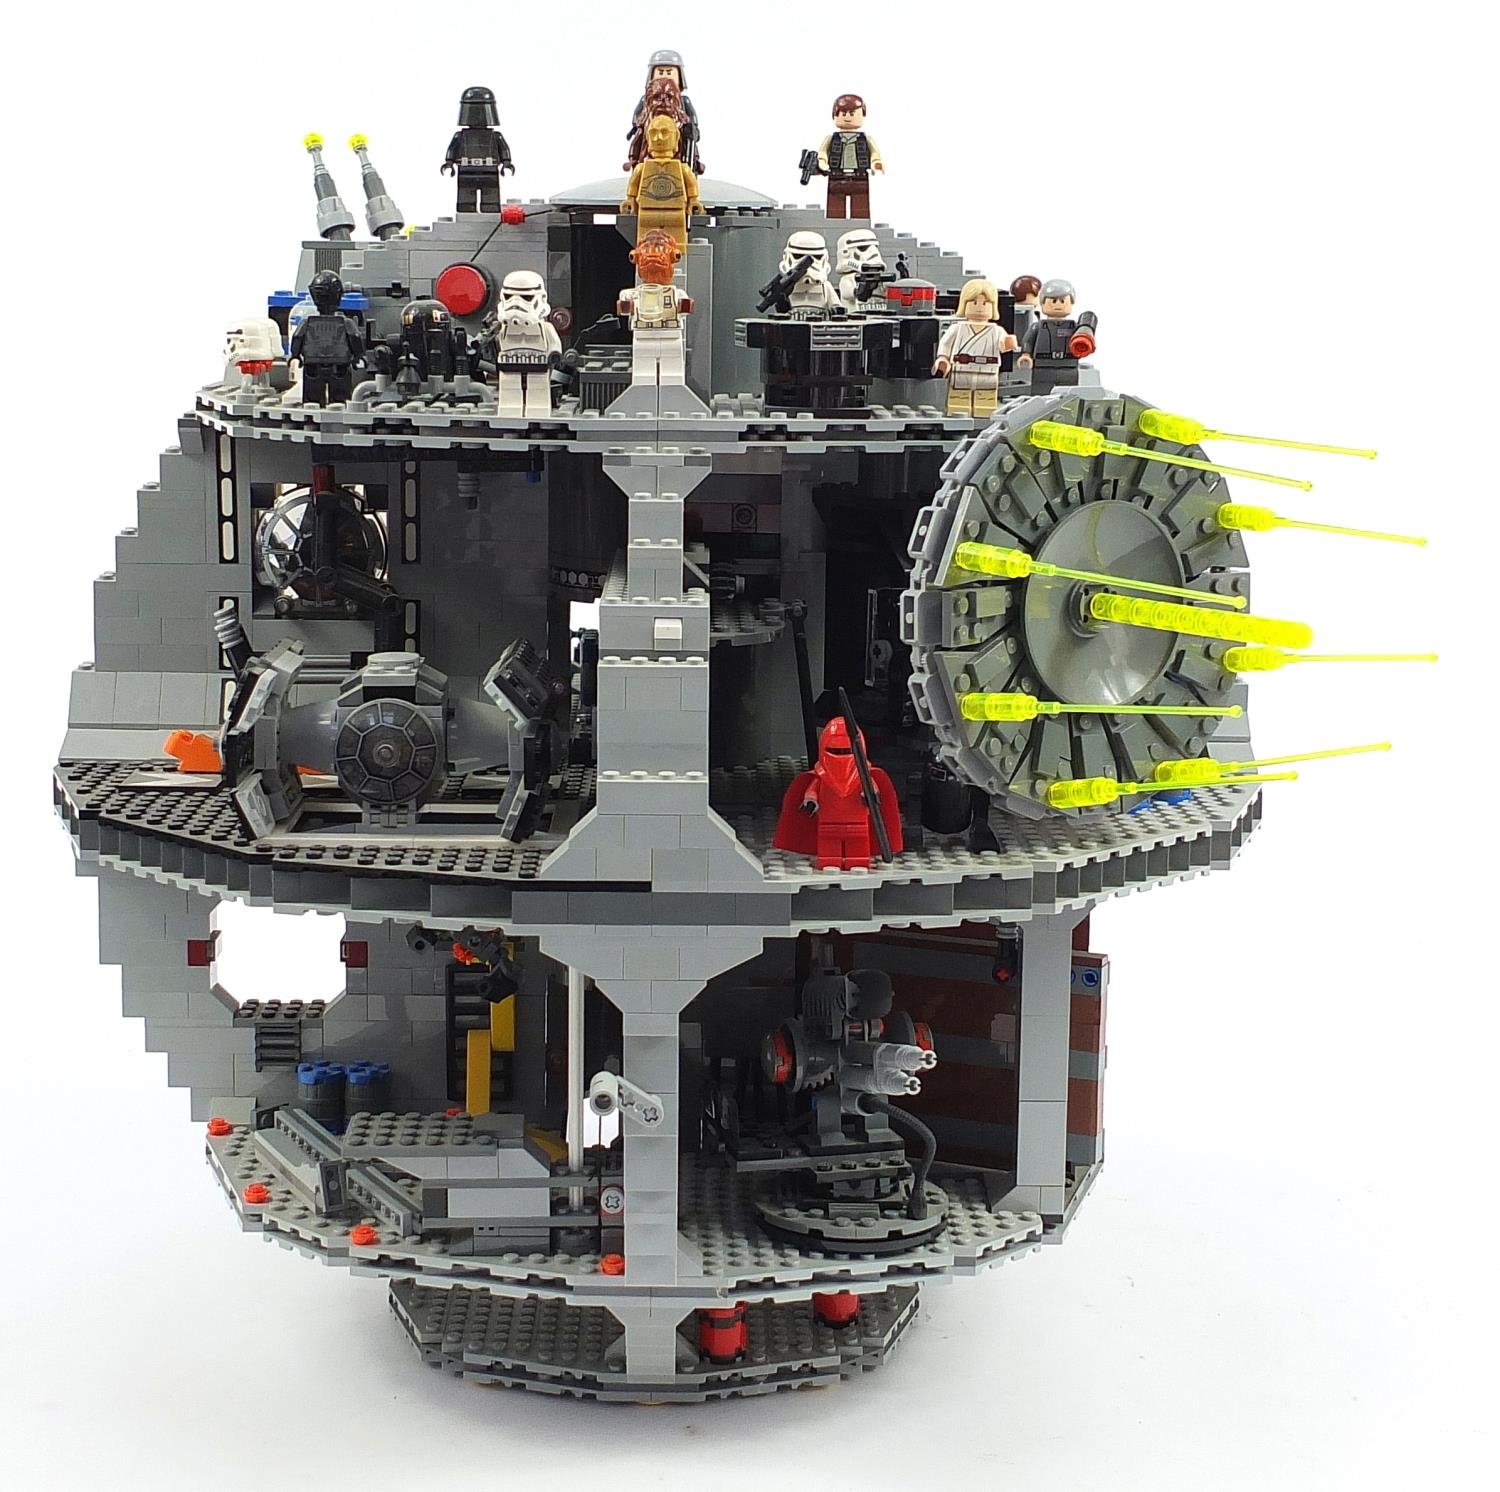 Completed Lego Star Wars Death Star with instructions no 10188, 41cm high - Image 2 of 7